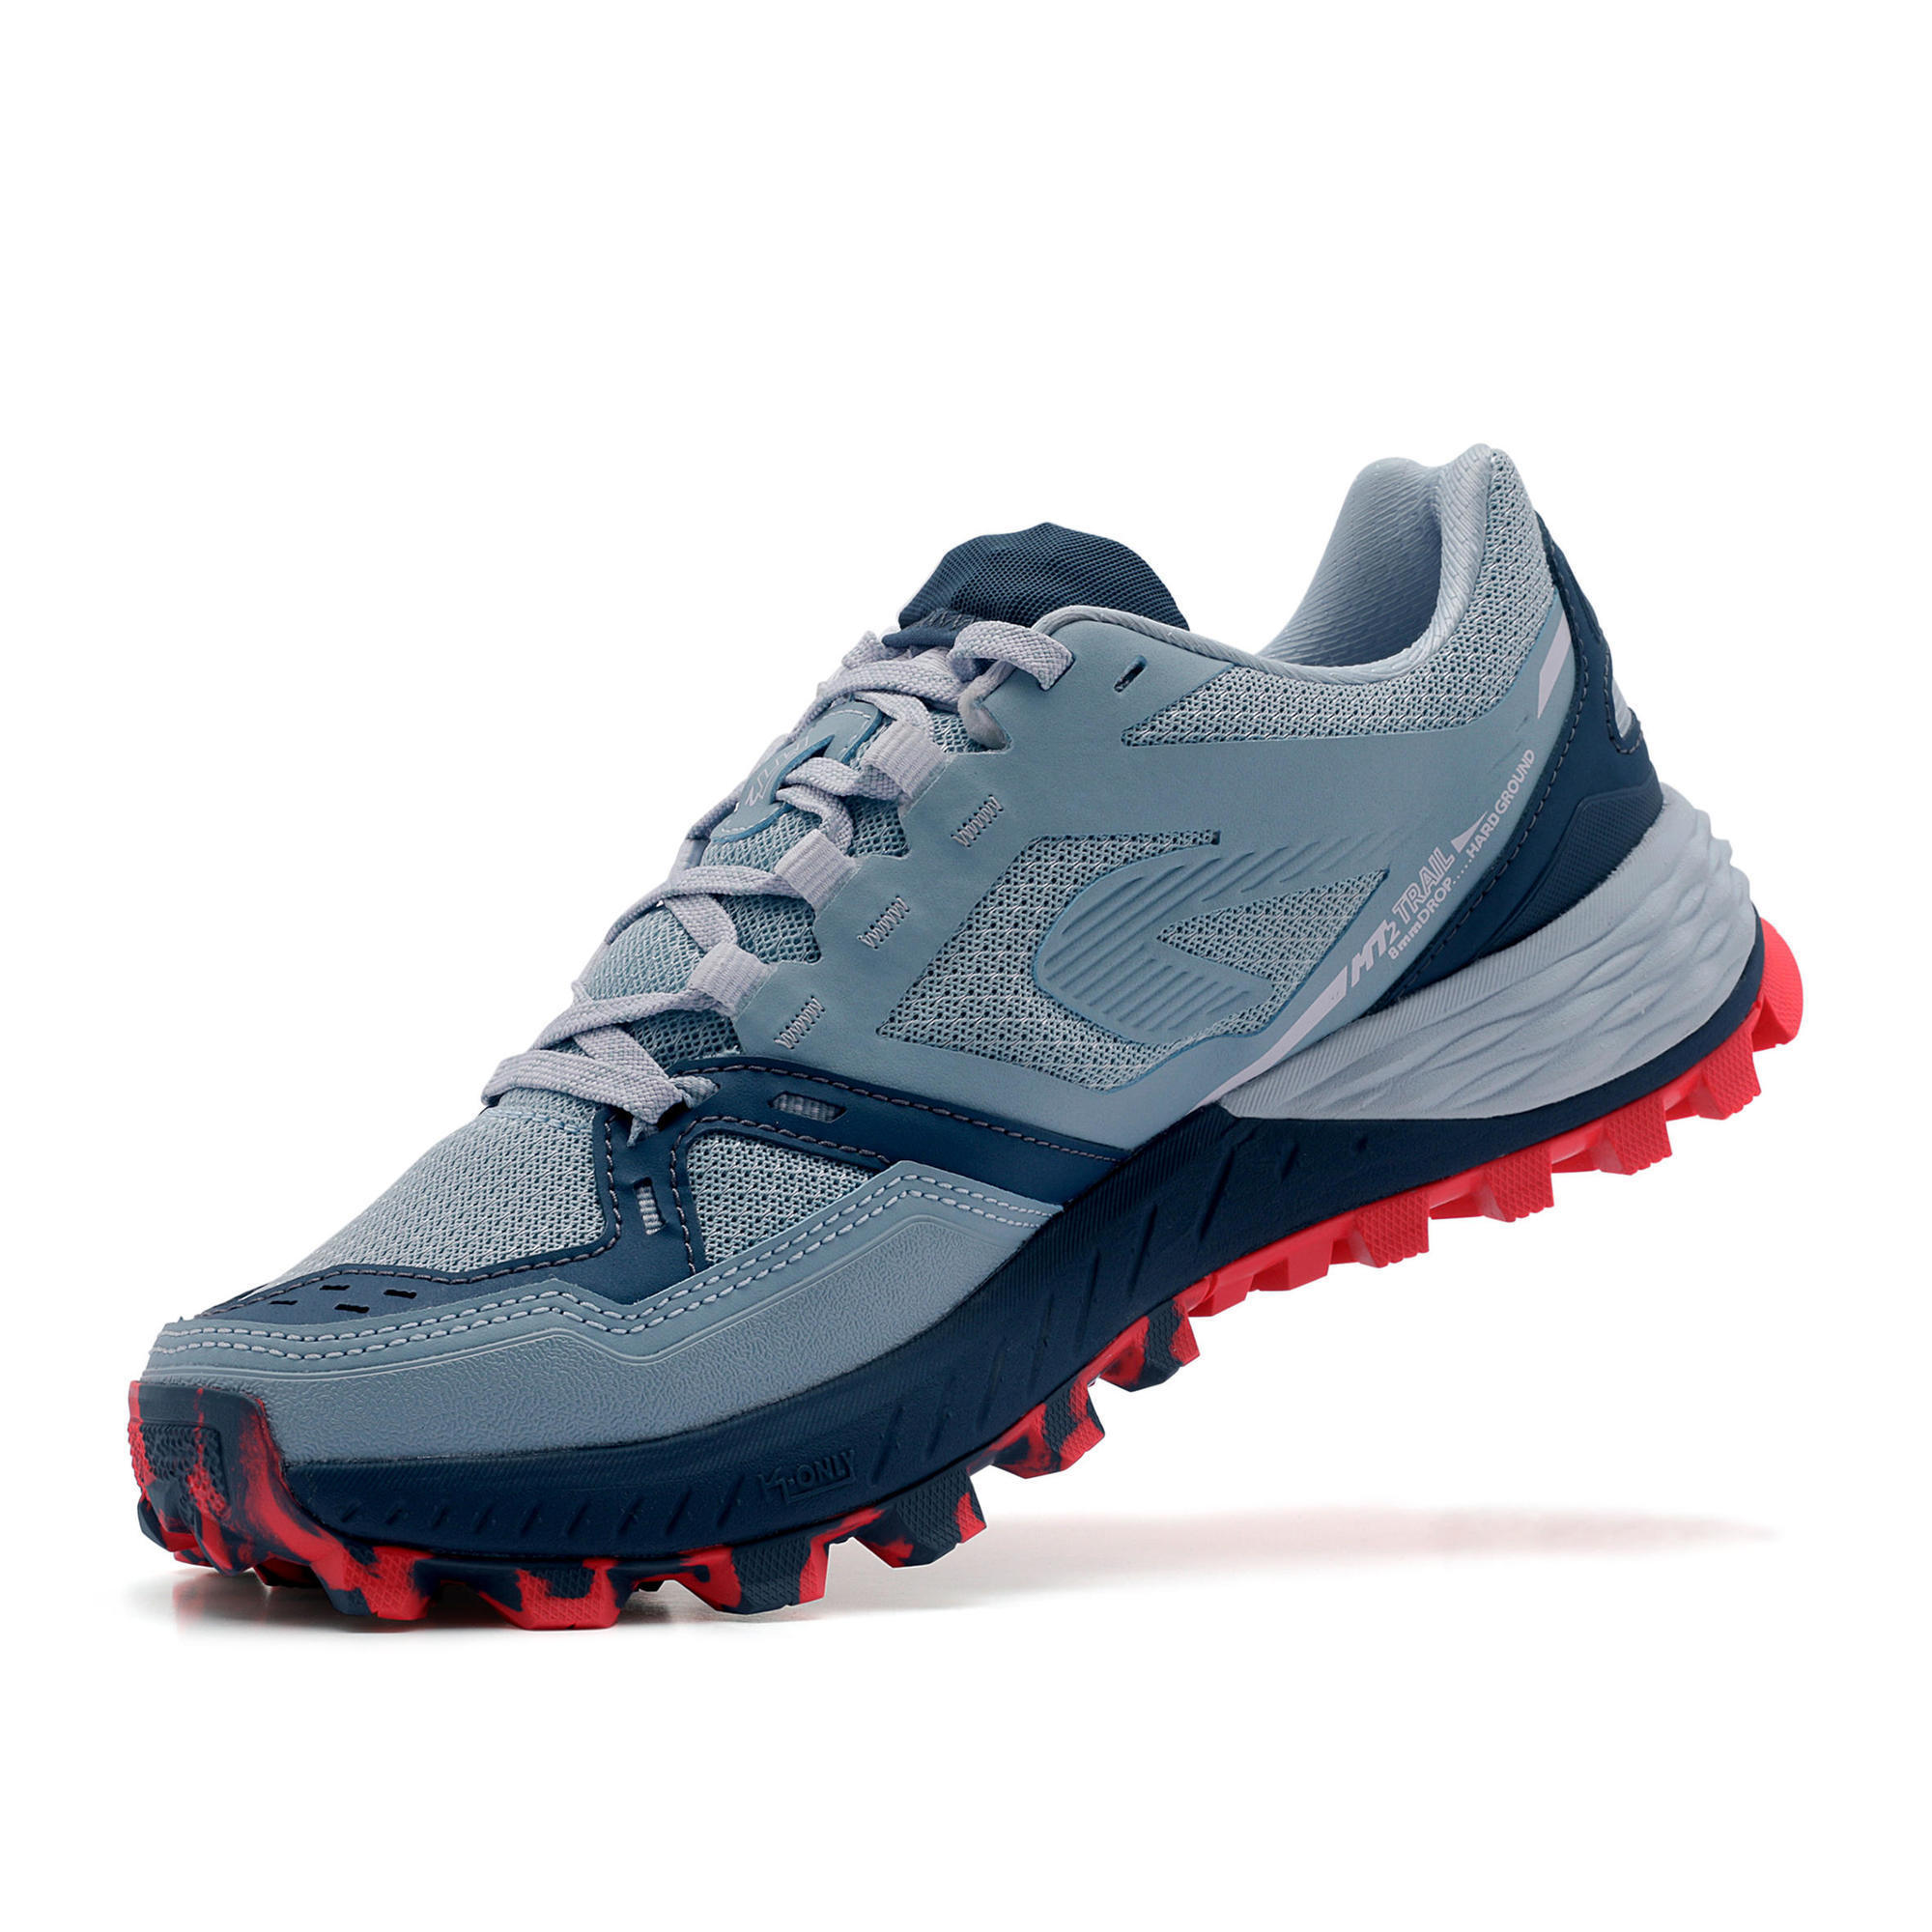 TRAIL RUNNING SHOES - LIGHT BLUE/PINK 